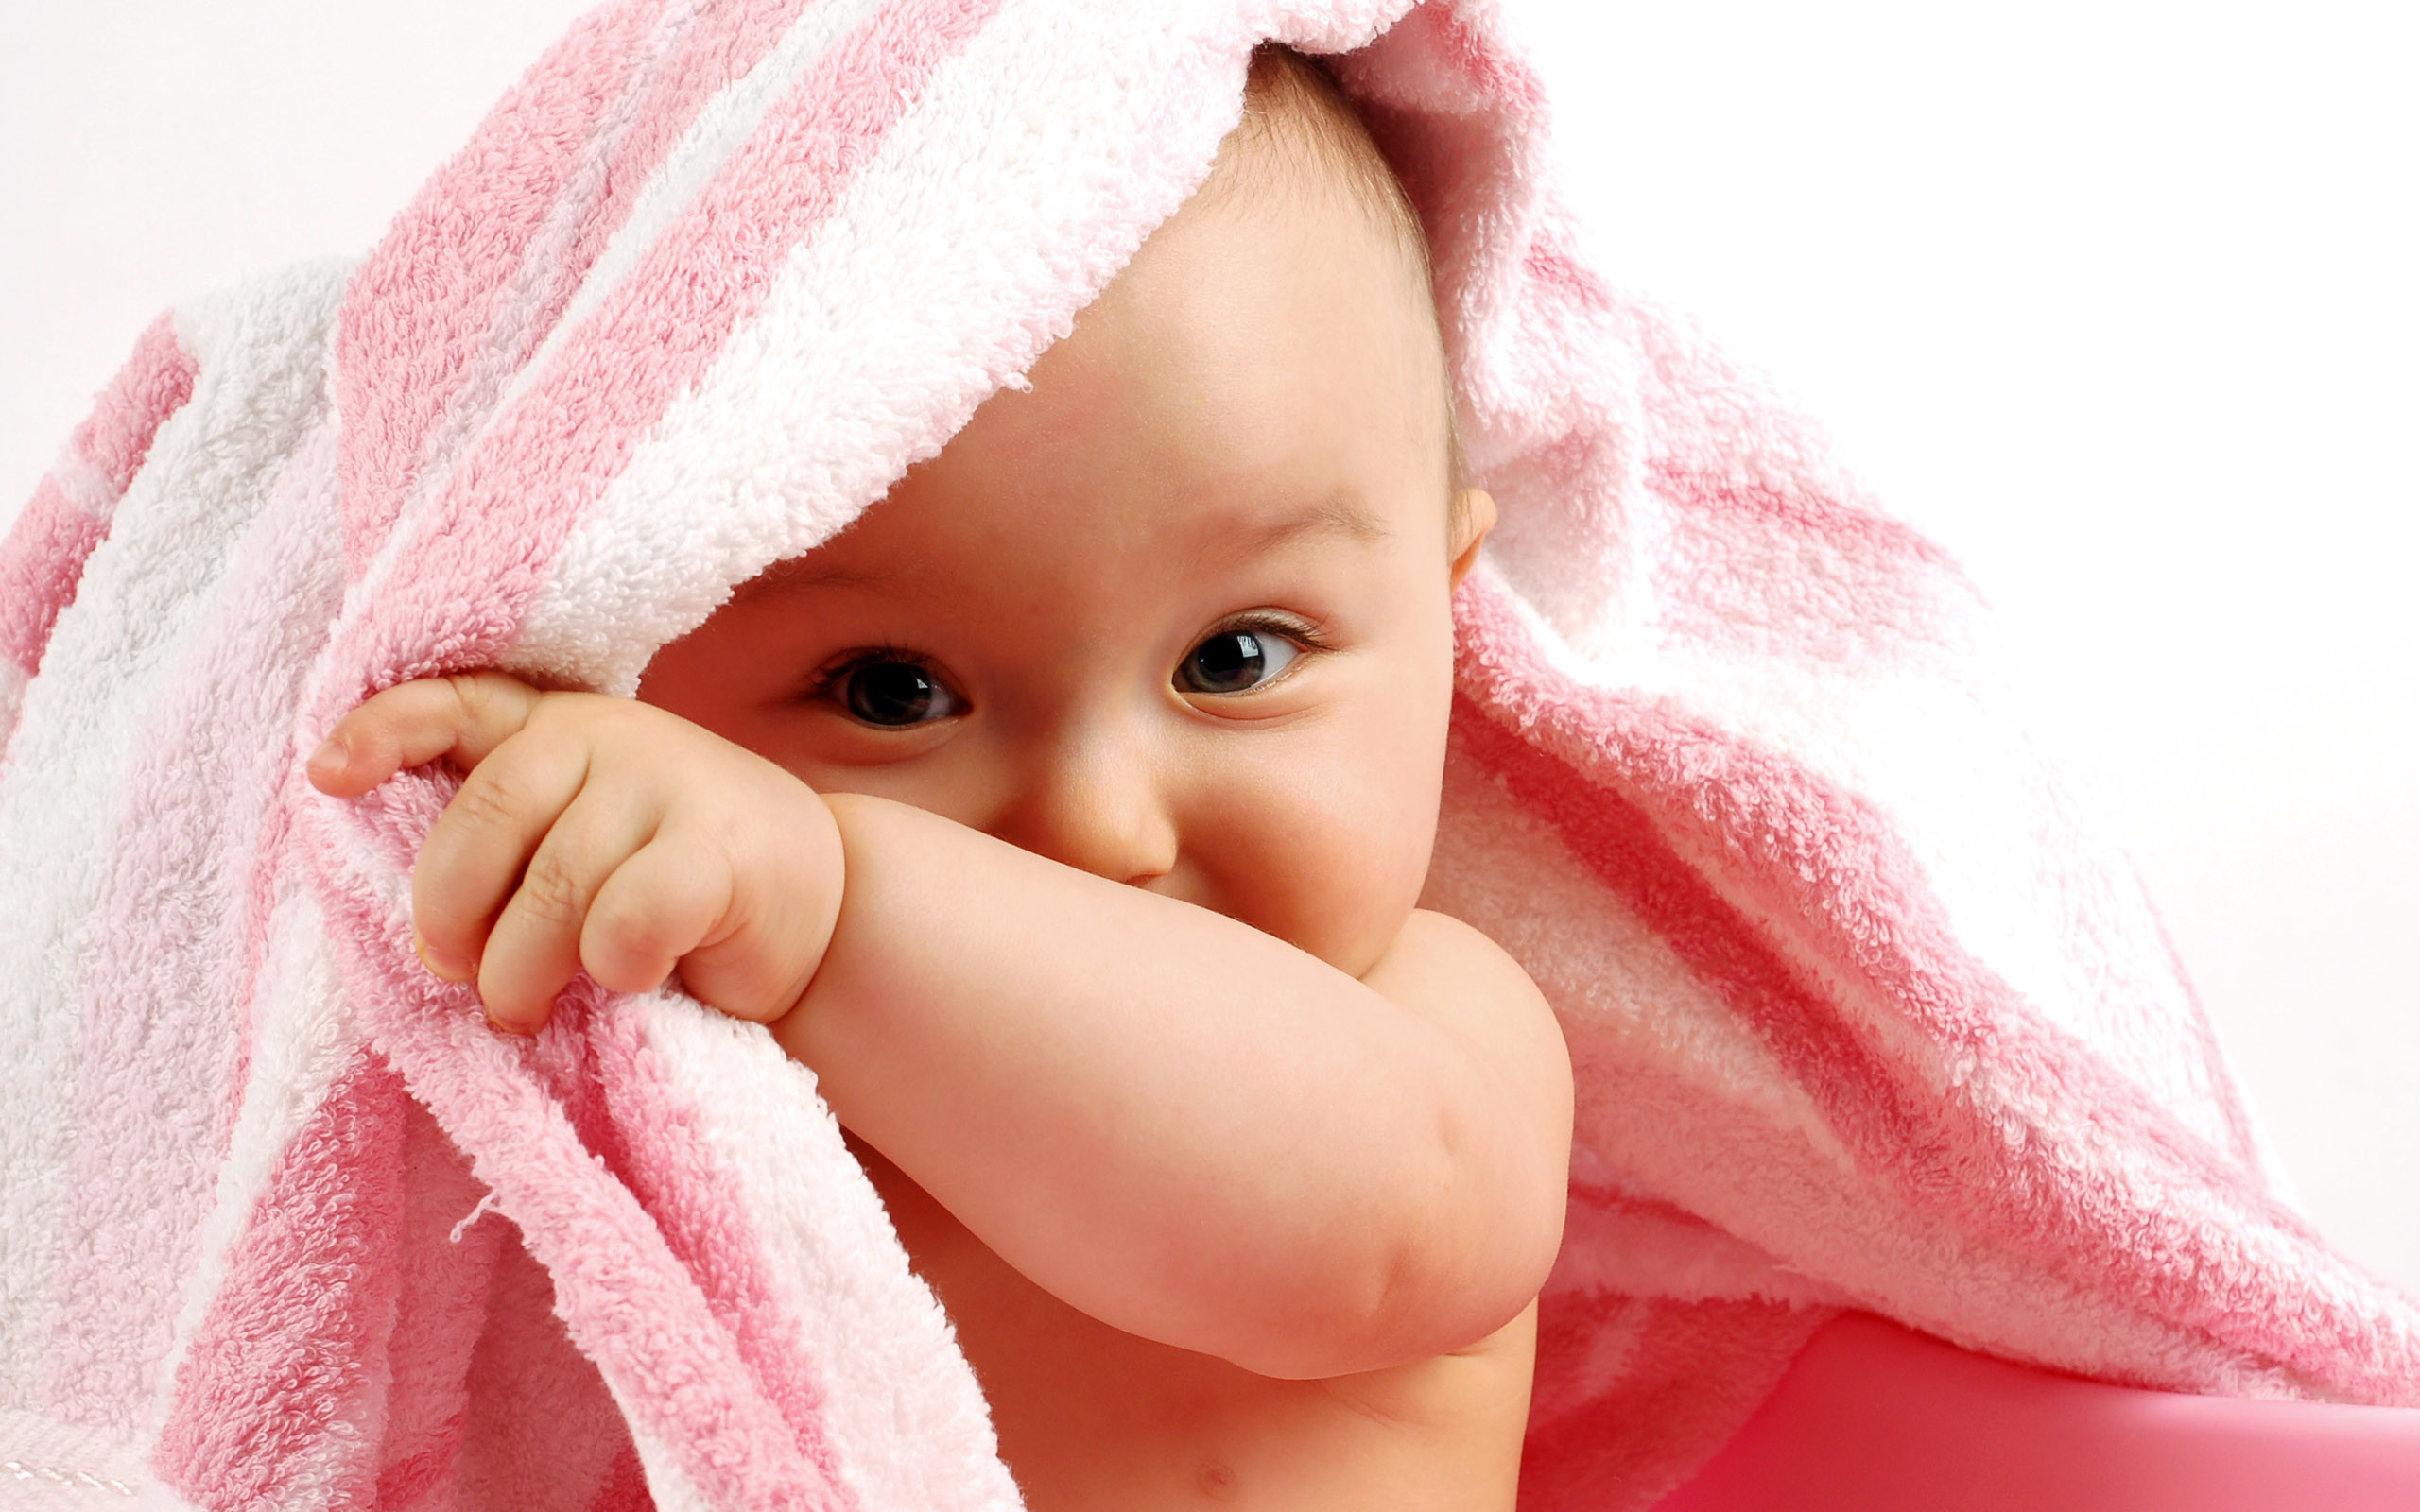 2560x1600 ... Cute Baby Boy Pictures For Facebook Profile | Wallpaper Images ...